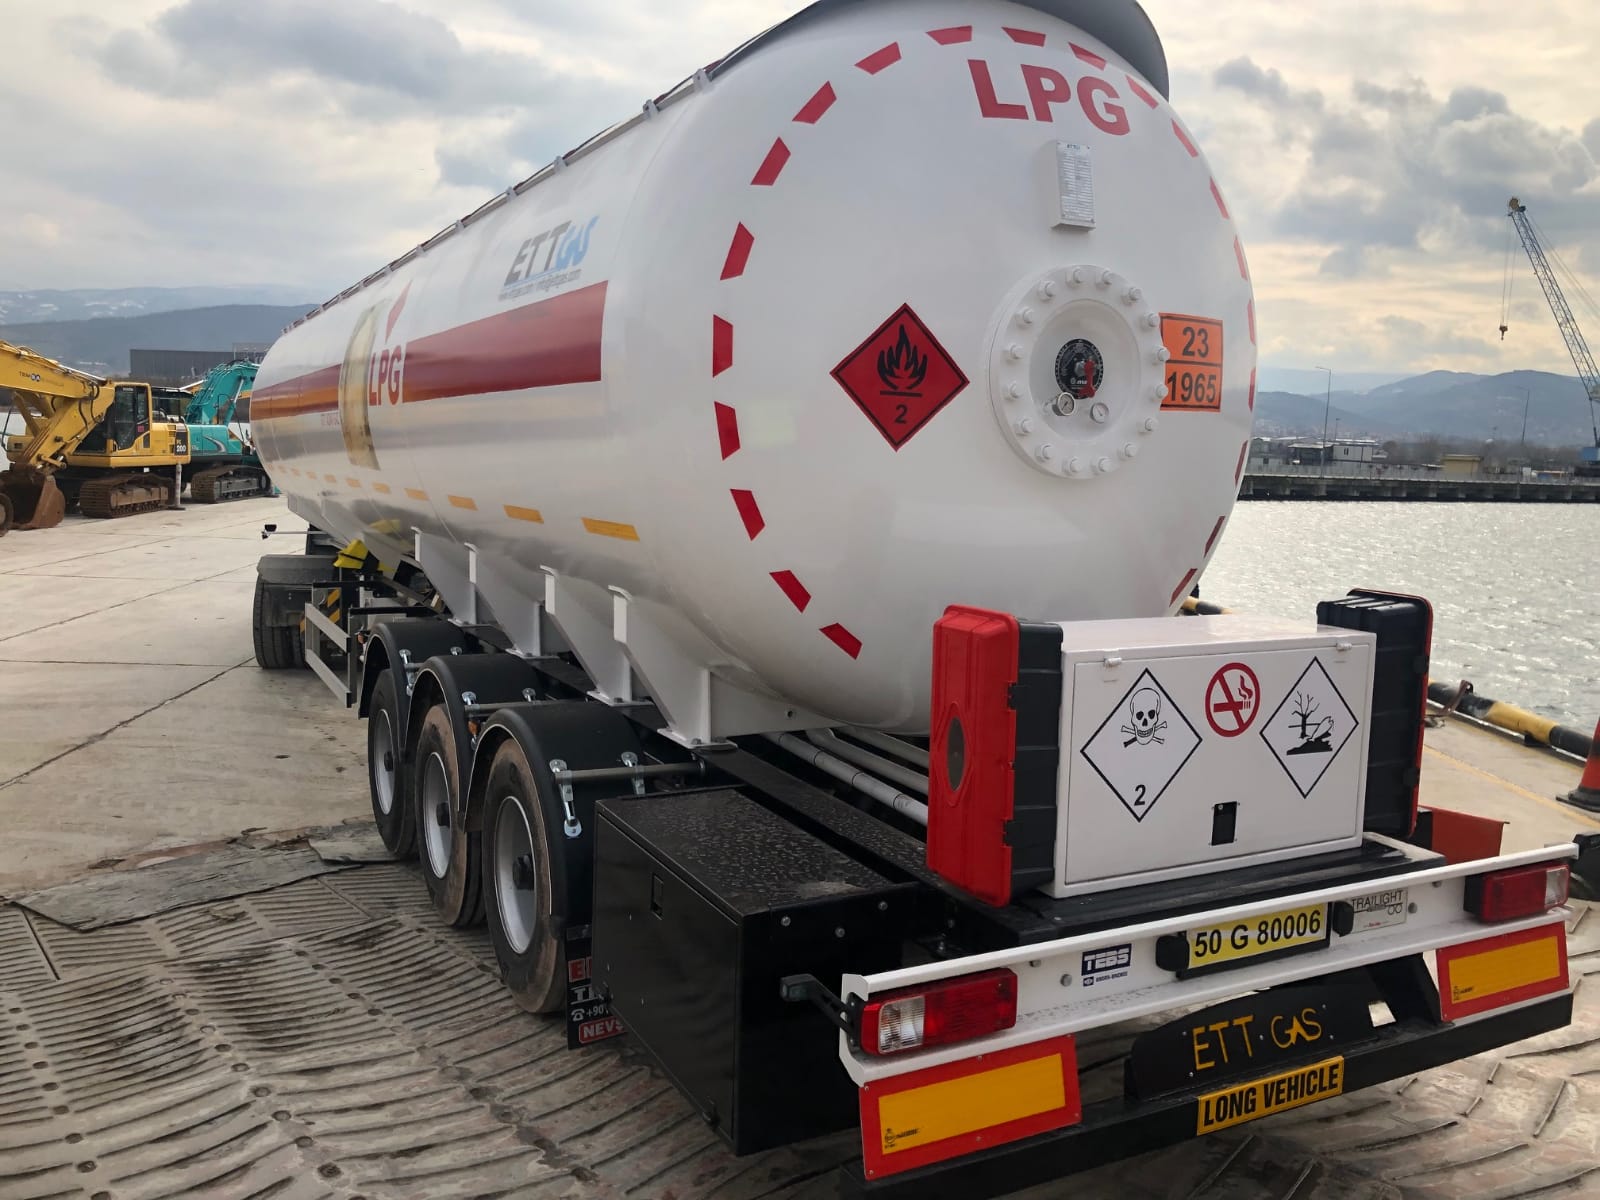 Another 57 M3 Lpg Trailer delivery to Niger 25.02.2019